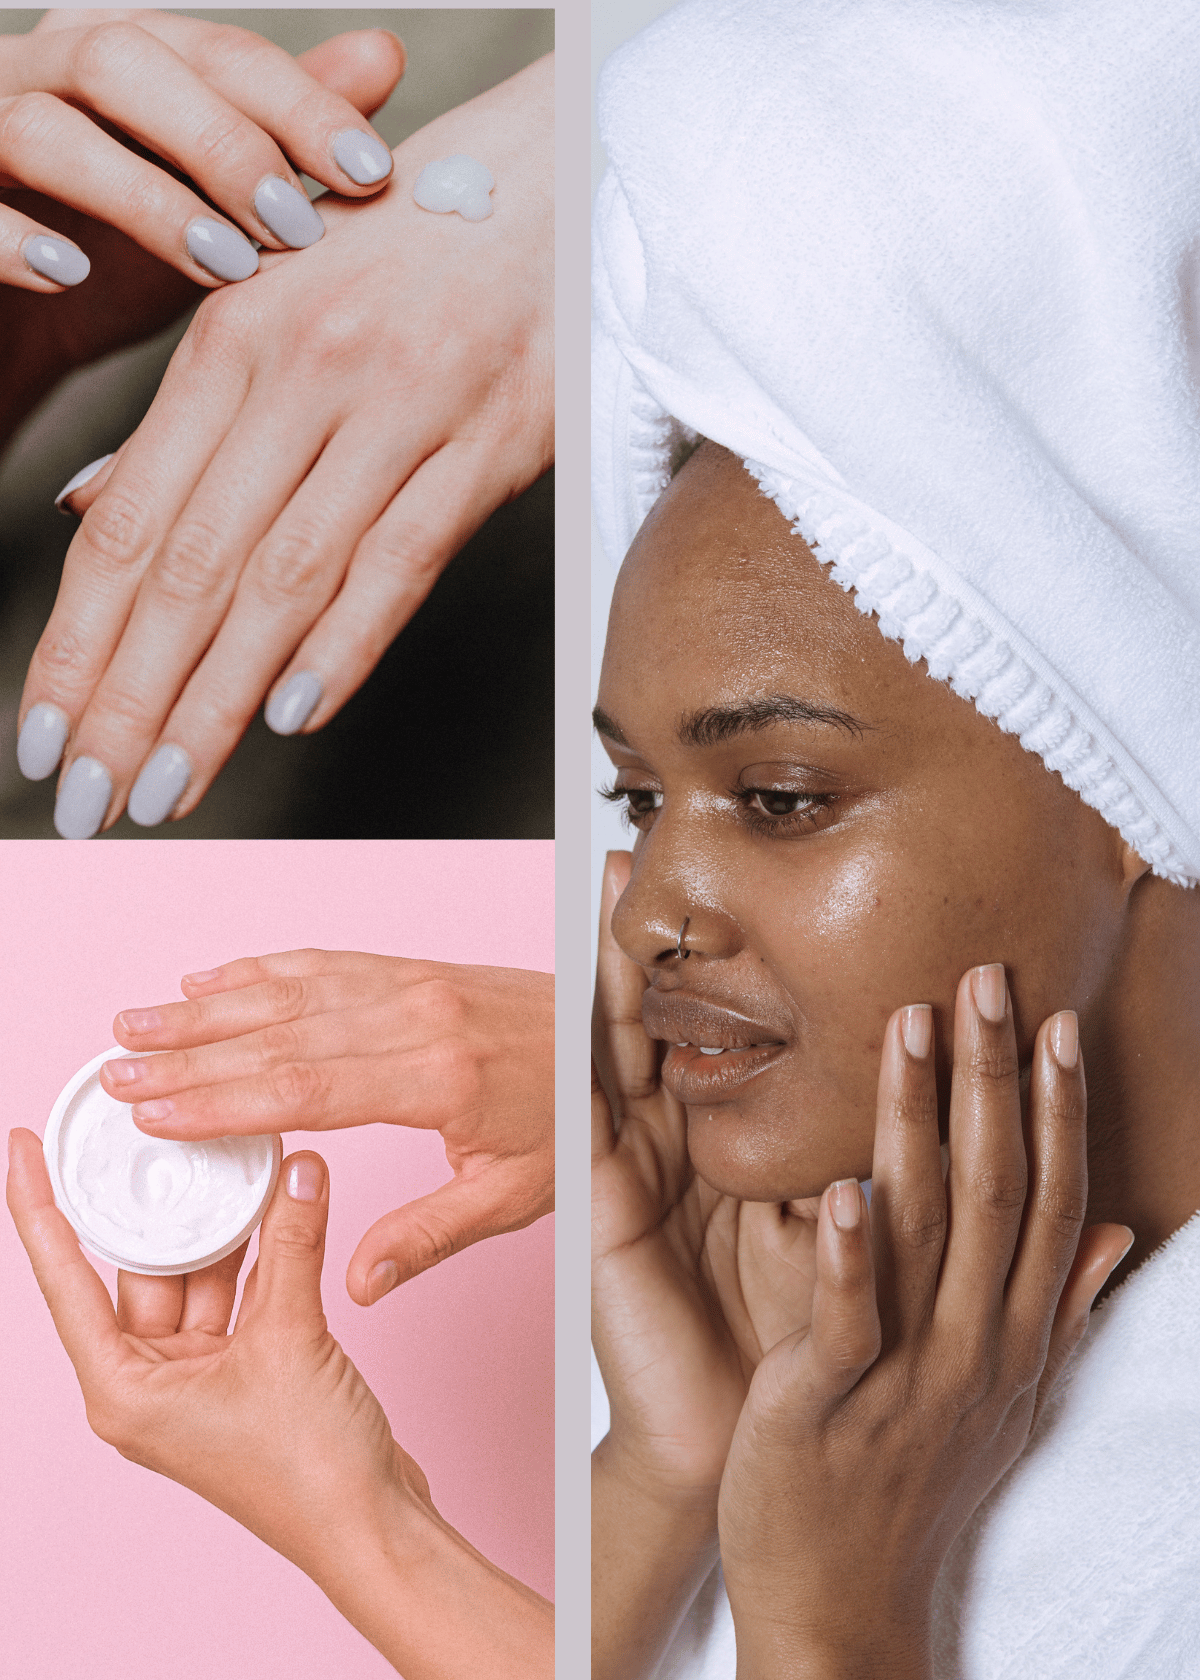 Skin Lightening Creams and Pregnancy: What You Should Know